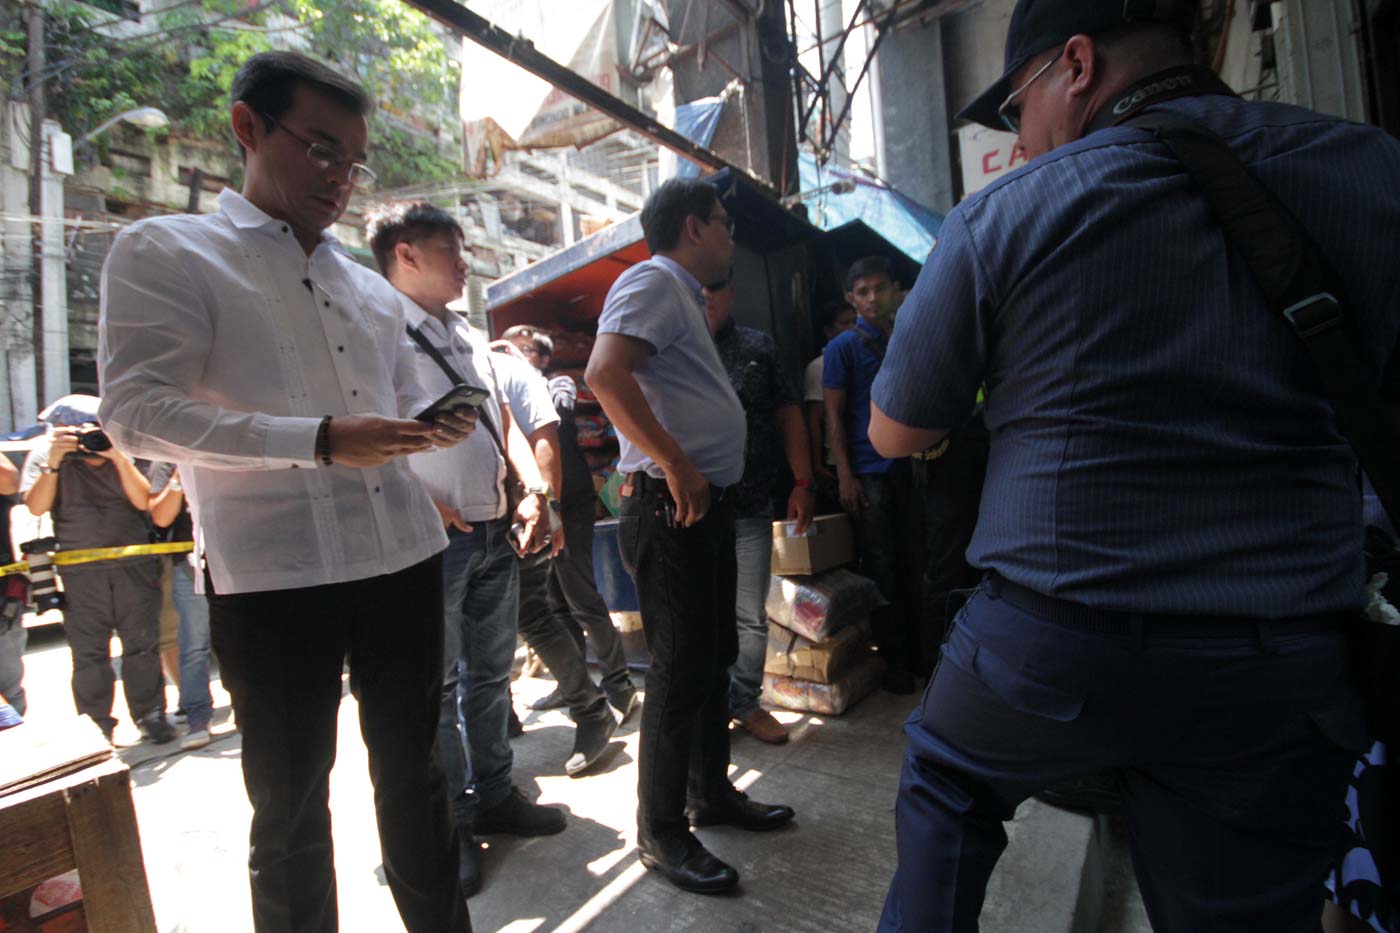 TECH-SAVY MAYO. Manila Mayor Isko Moreno inspects the Metrobank Binondo Branch in Manila on Thursday, July 11, following an alleged robbery by 7 suspects, two of which were wearing security guard's uniform according to eye witnesses. Photo by Ben Nabong/Rappler  